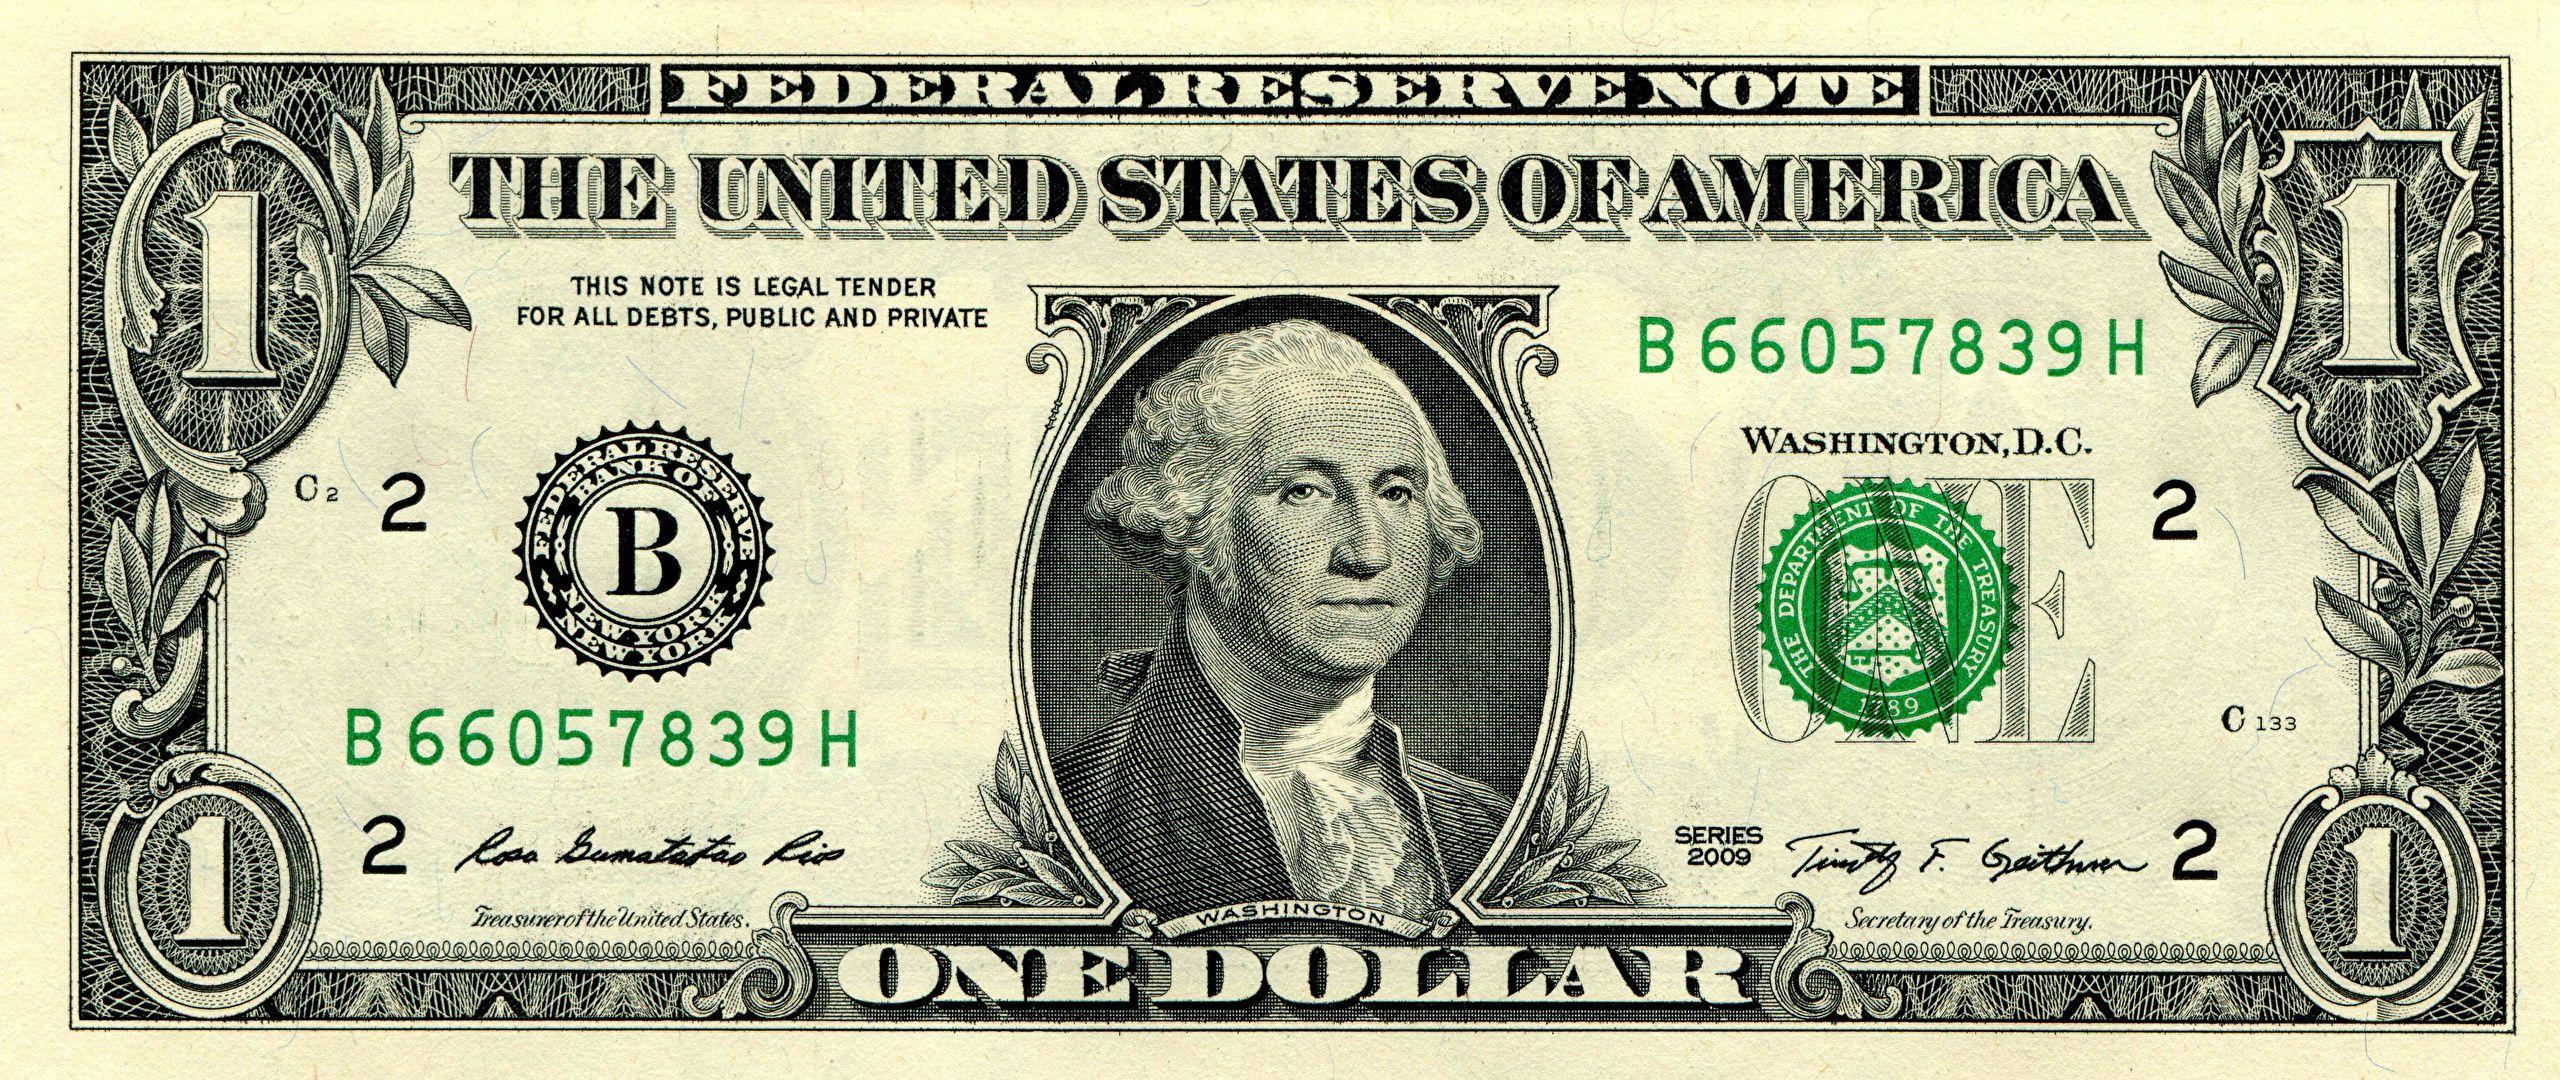 Picture Dollars Banknotes 1 Washington, Federal Reserve 2560x1080